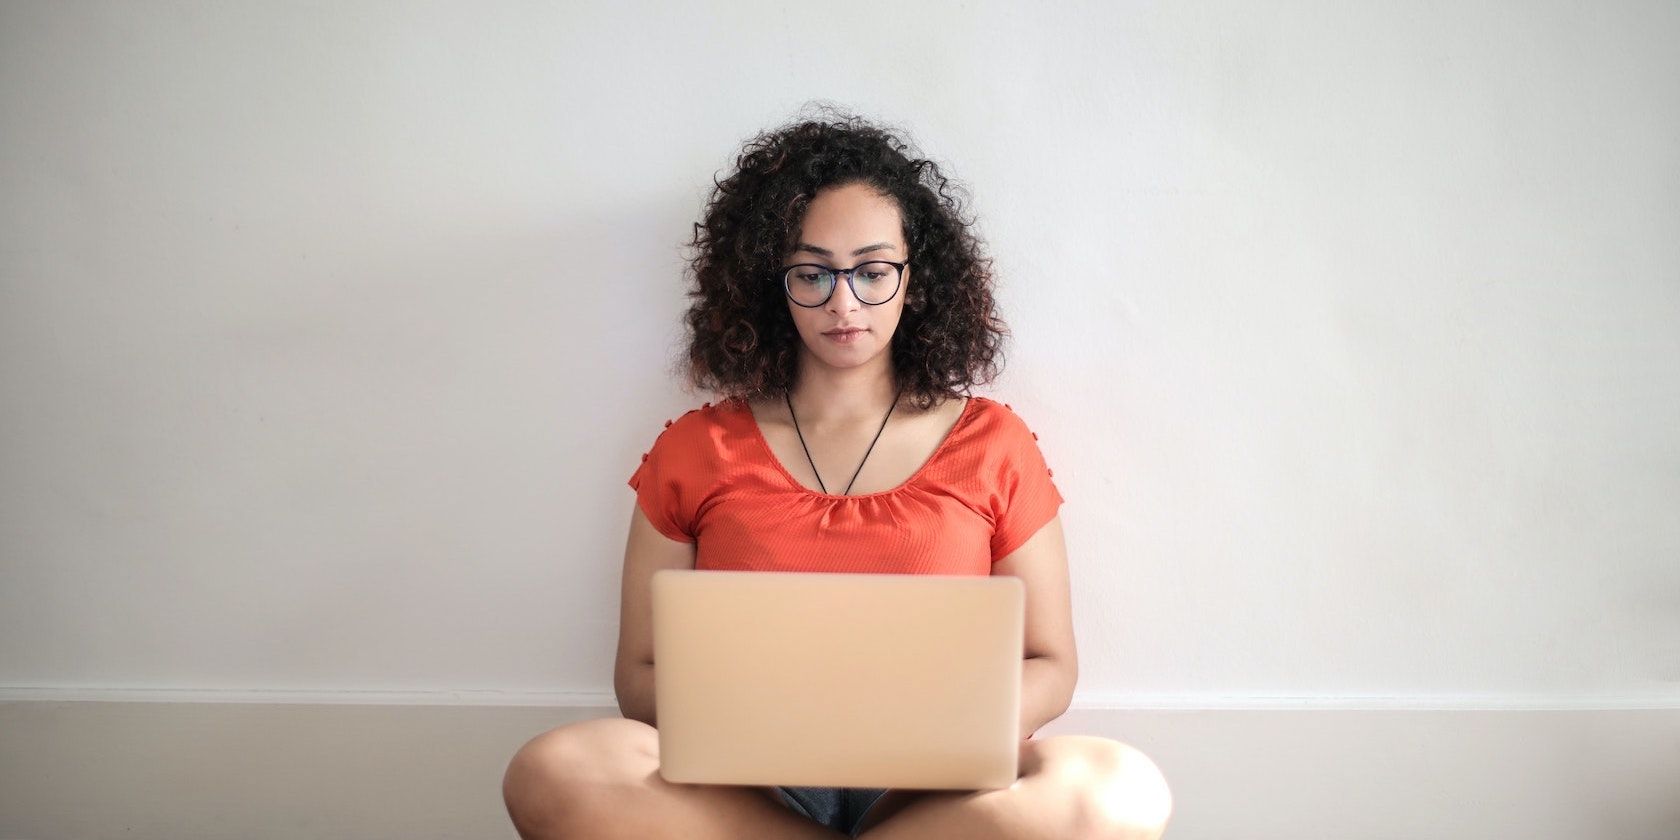 A woman sitting cross-legged on the floor, facing the camera, with a laptop on her knees.